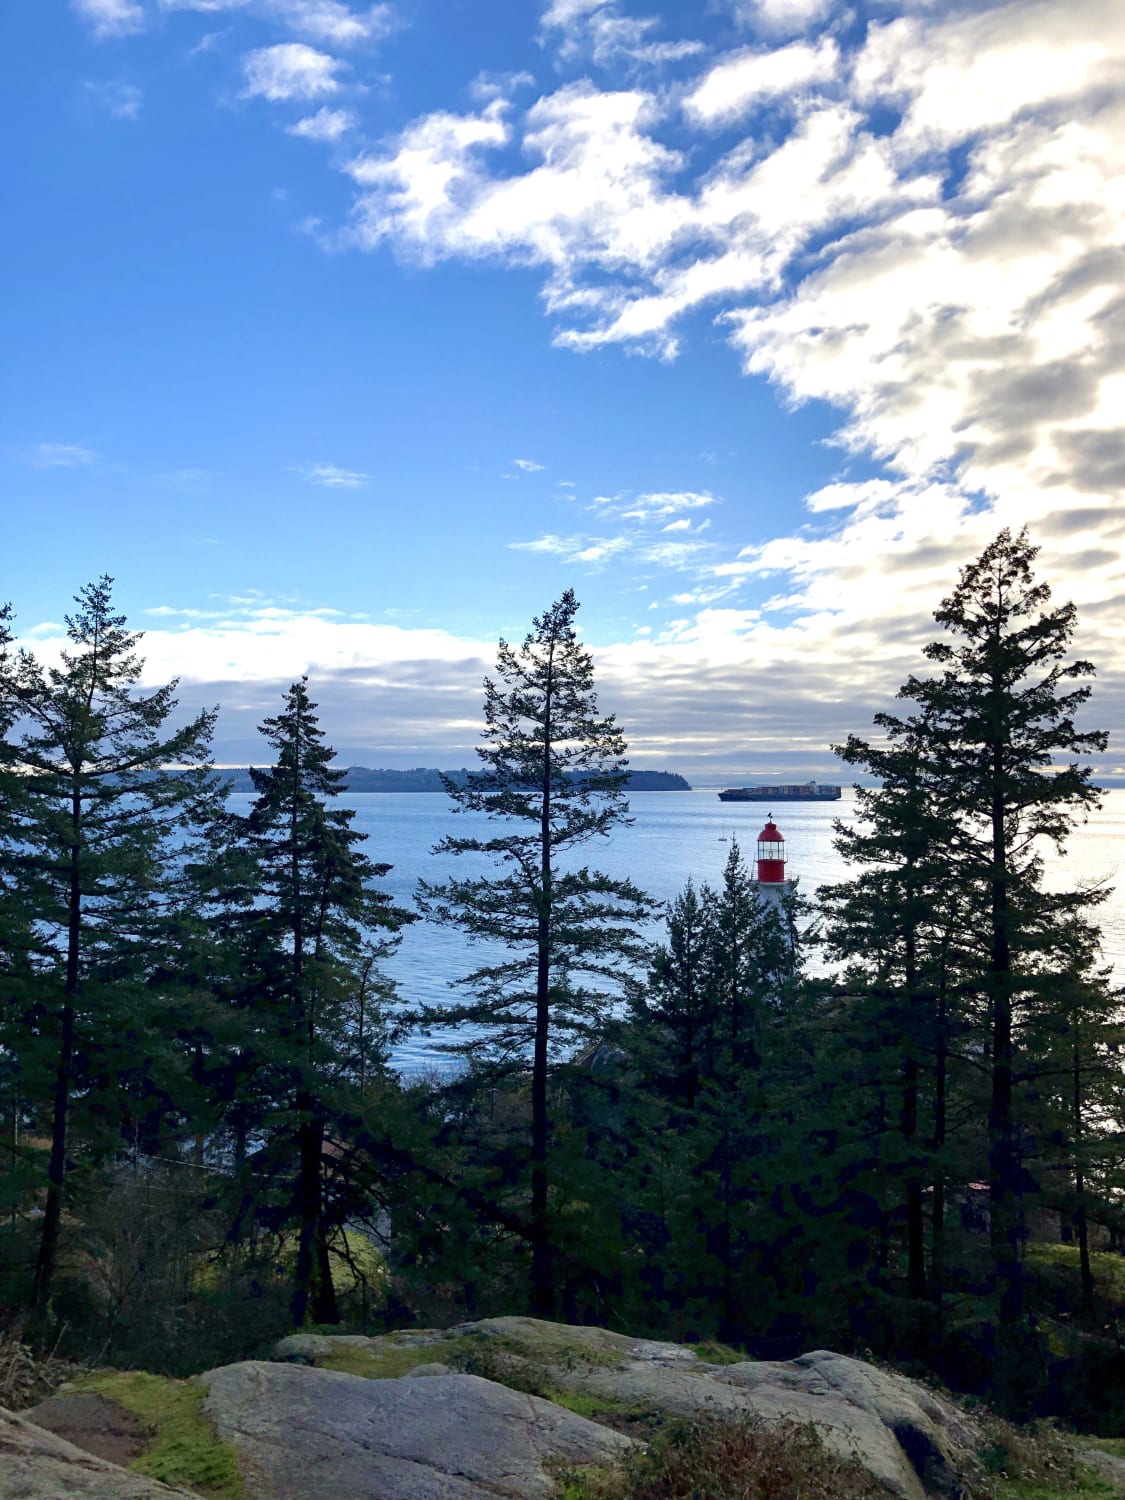 Rewarded with this view after hiking Lighthouse Park, Vancouver BC, Canada